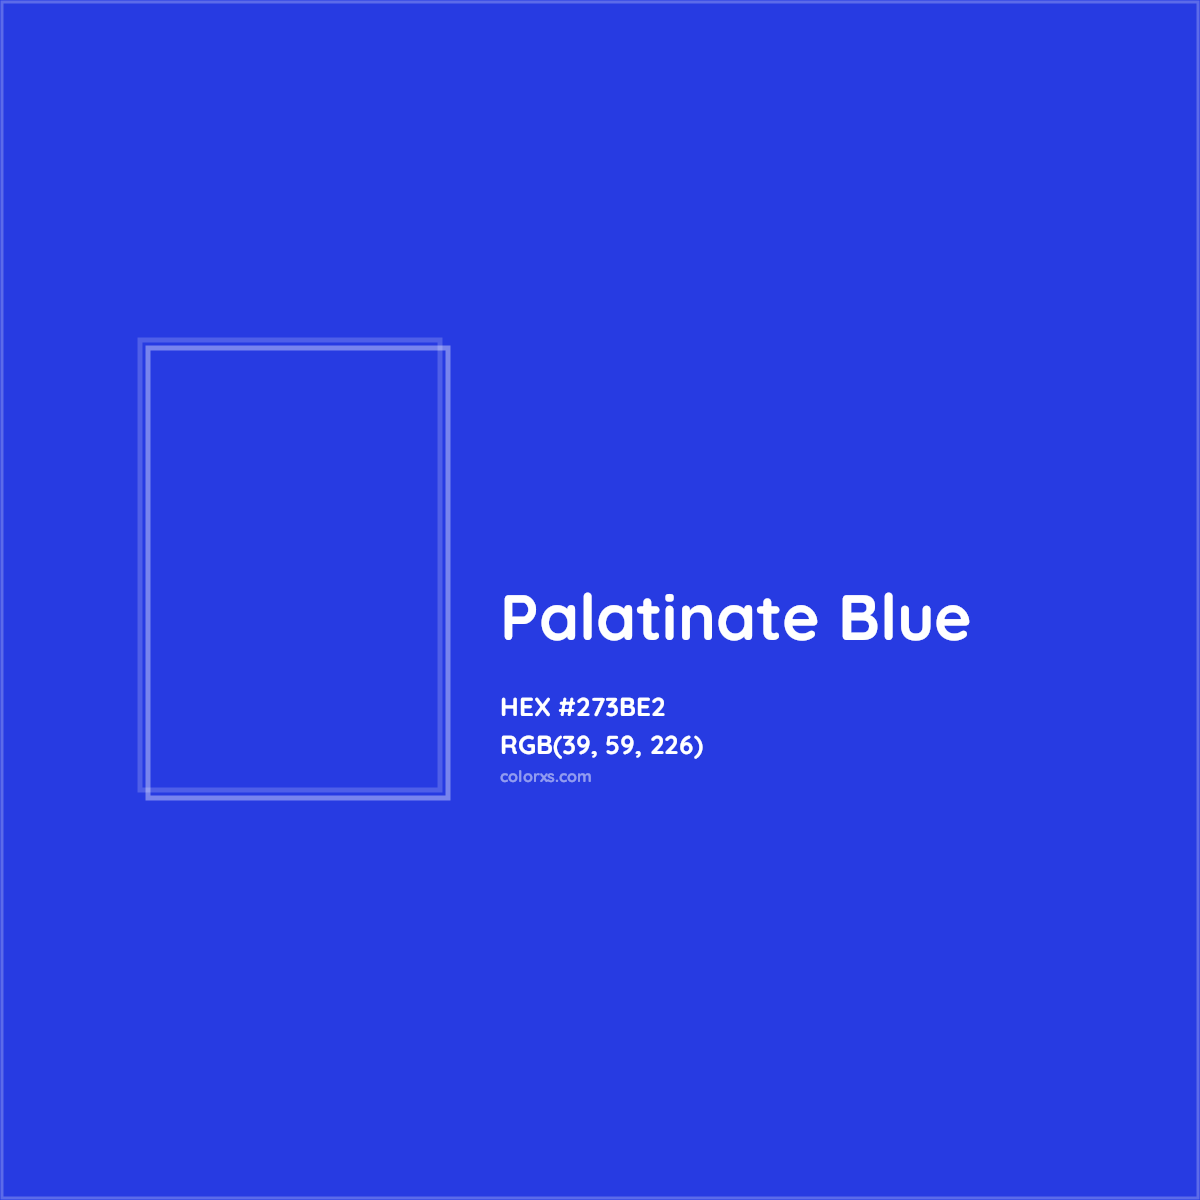 HEX #273BE2 Palatinate Blue Other - Color Code